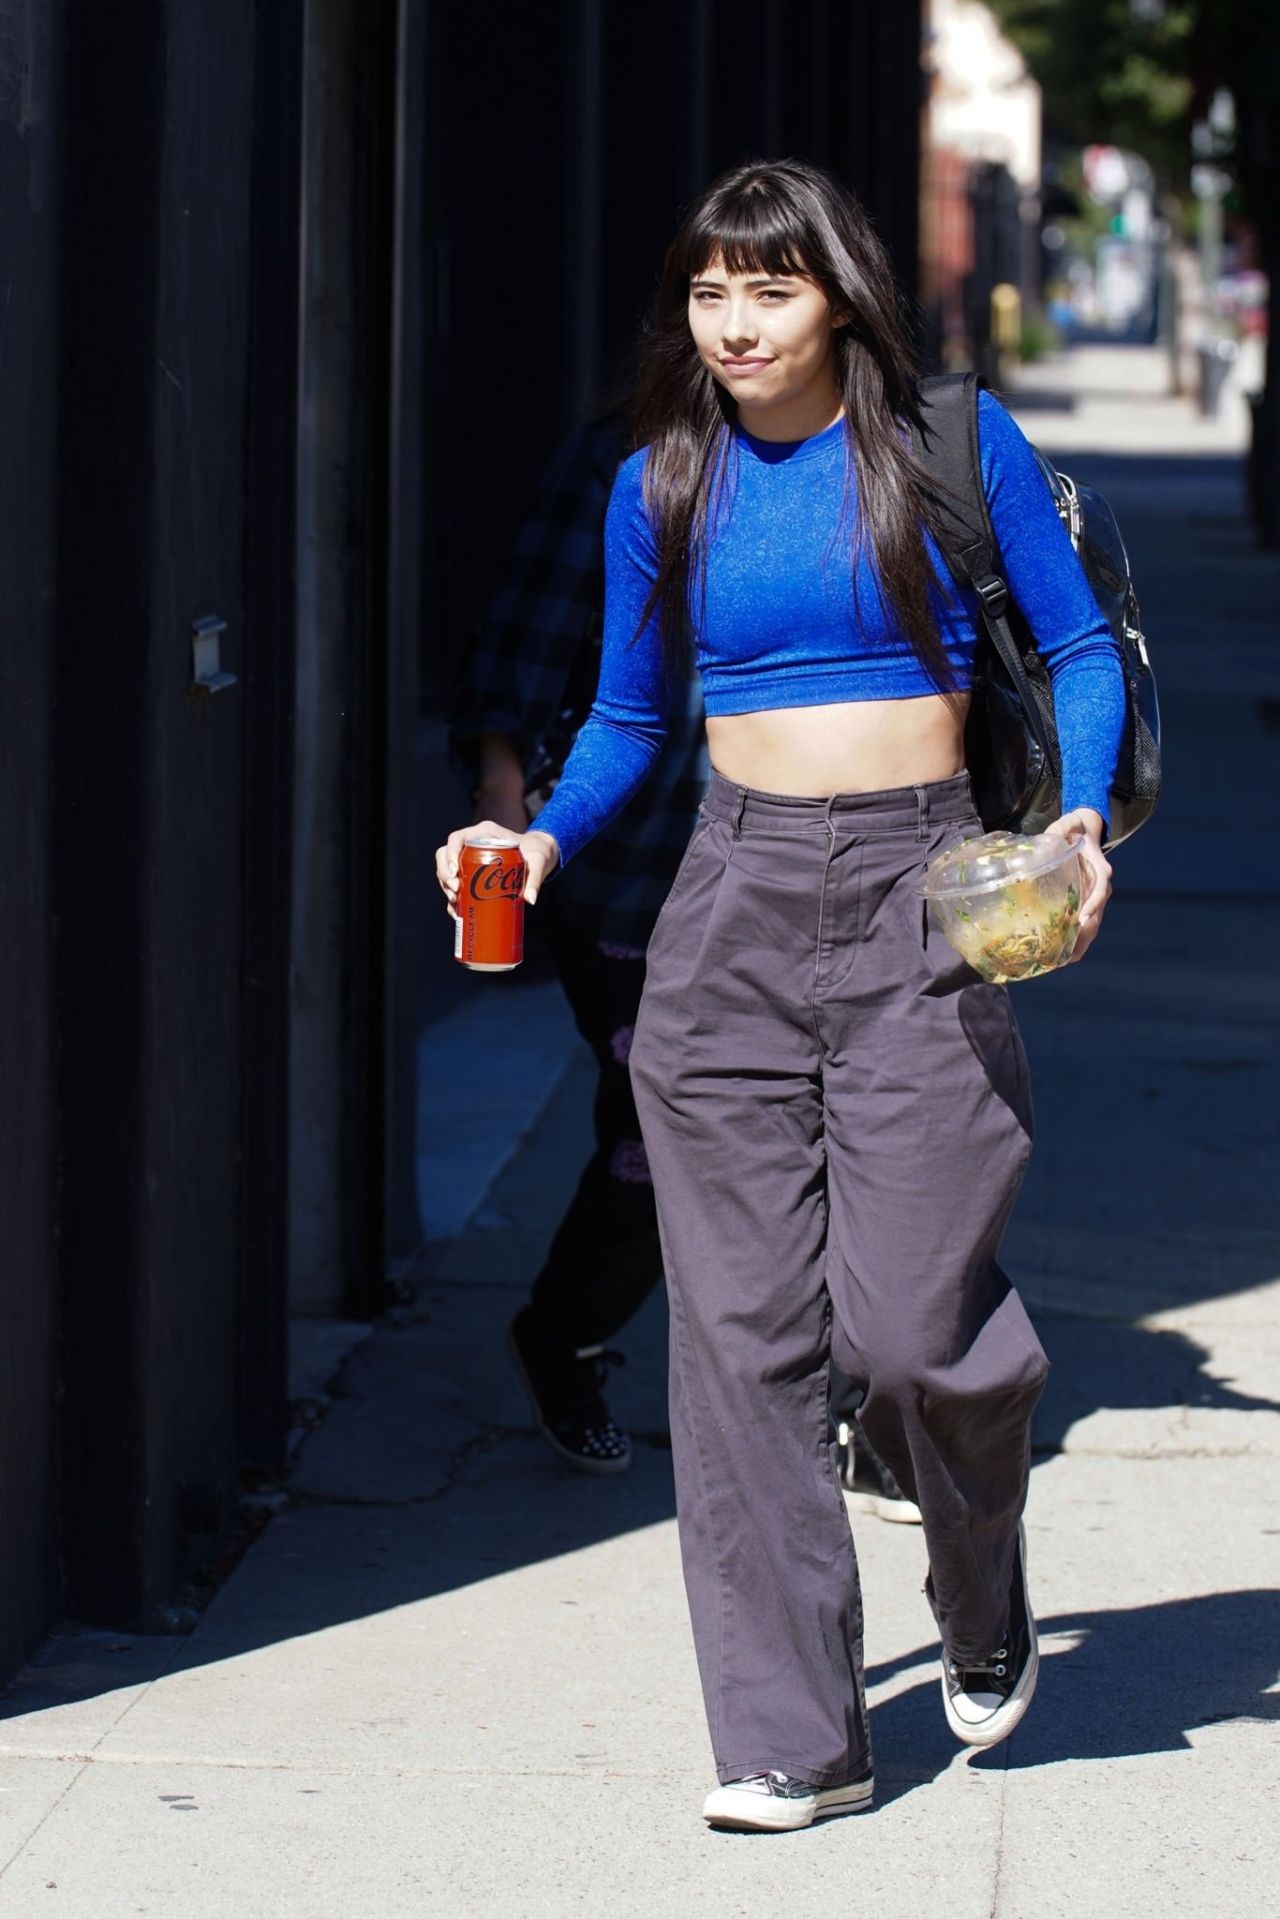 Xochitl Gomez looks fit in a blue sports bra and leggings while arriving  for the DWTS practice session in Los Angeles-140923_9